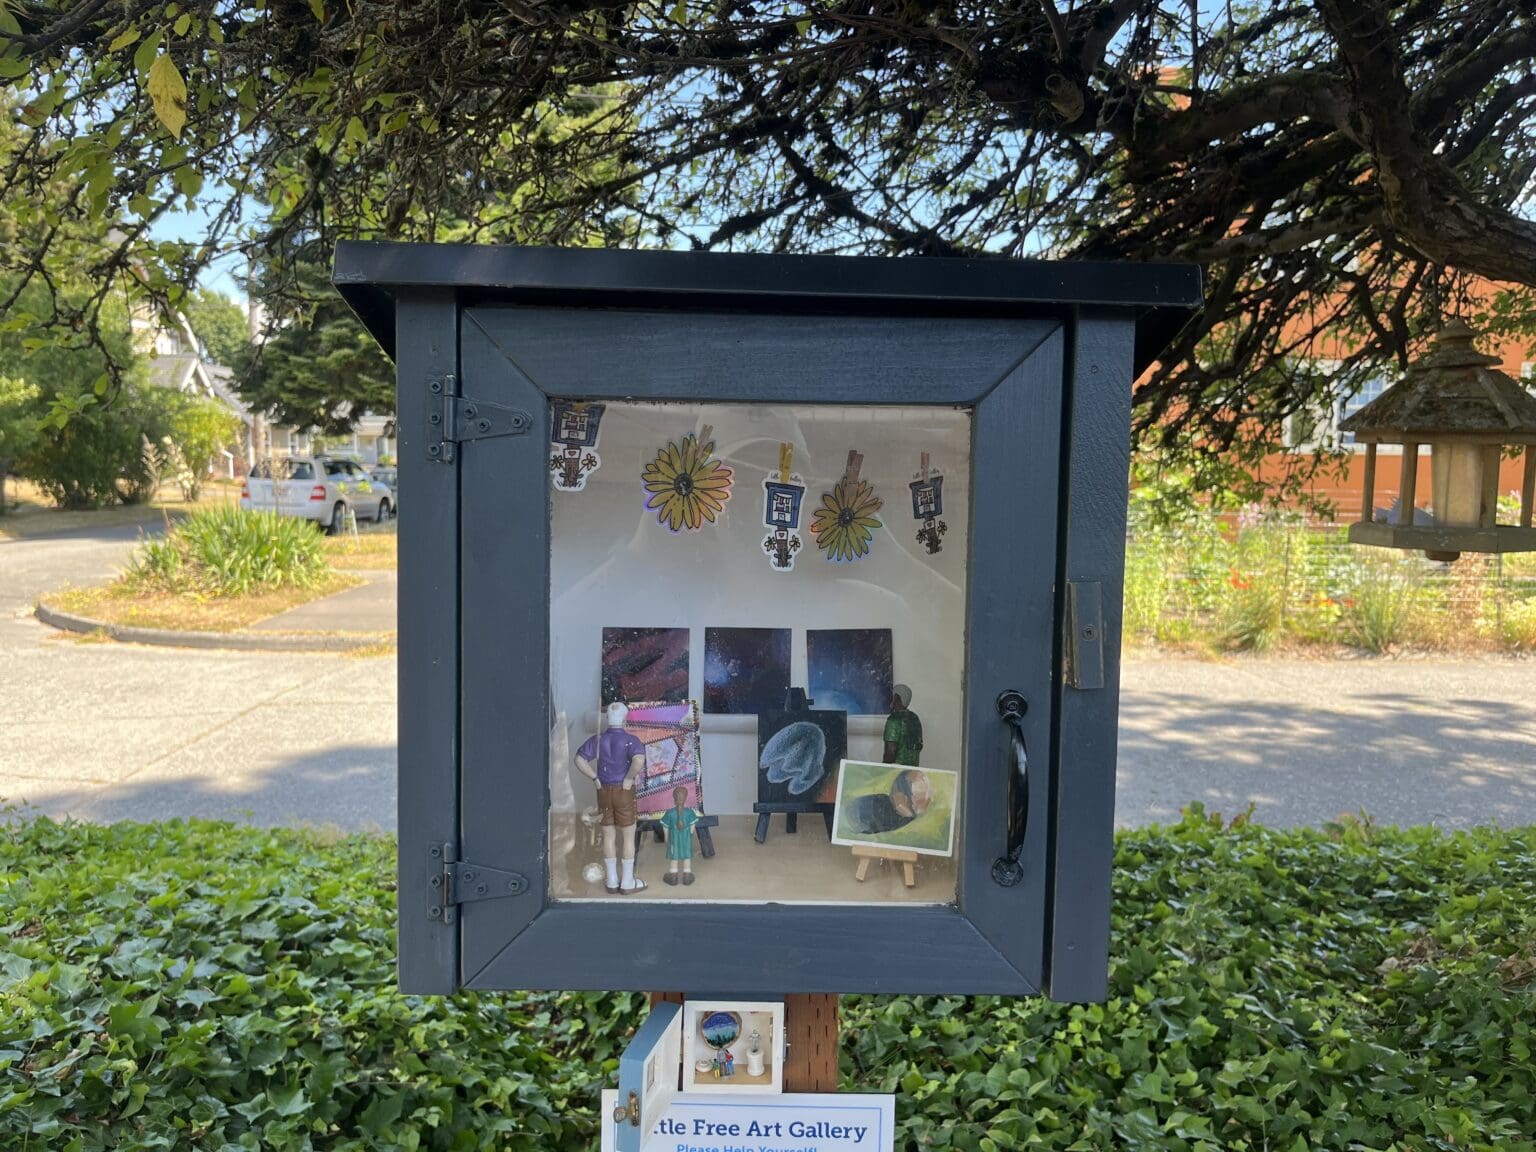 Bellingham designer and artist Katrina Lyon began a Little Free Art Gallery along the sidewalk near the corner of West Street and Eldridge Avenue in May 2021. People can leave a piece